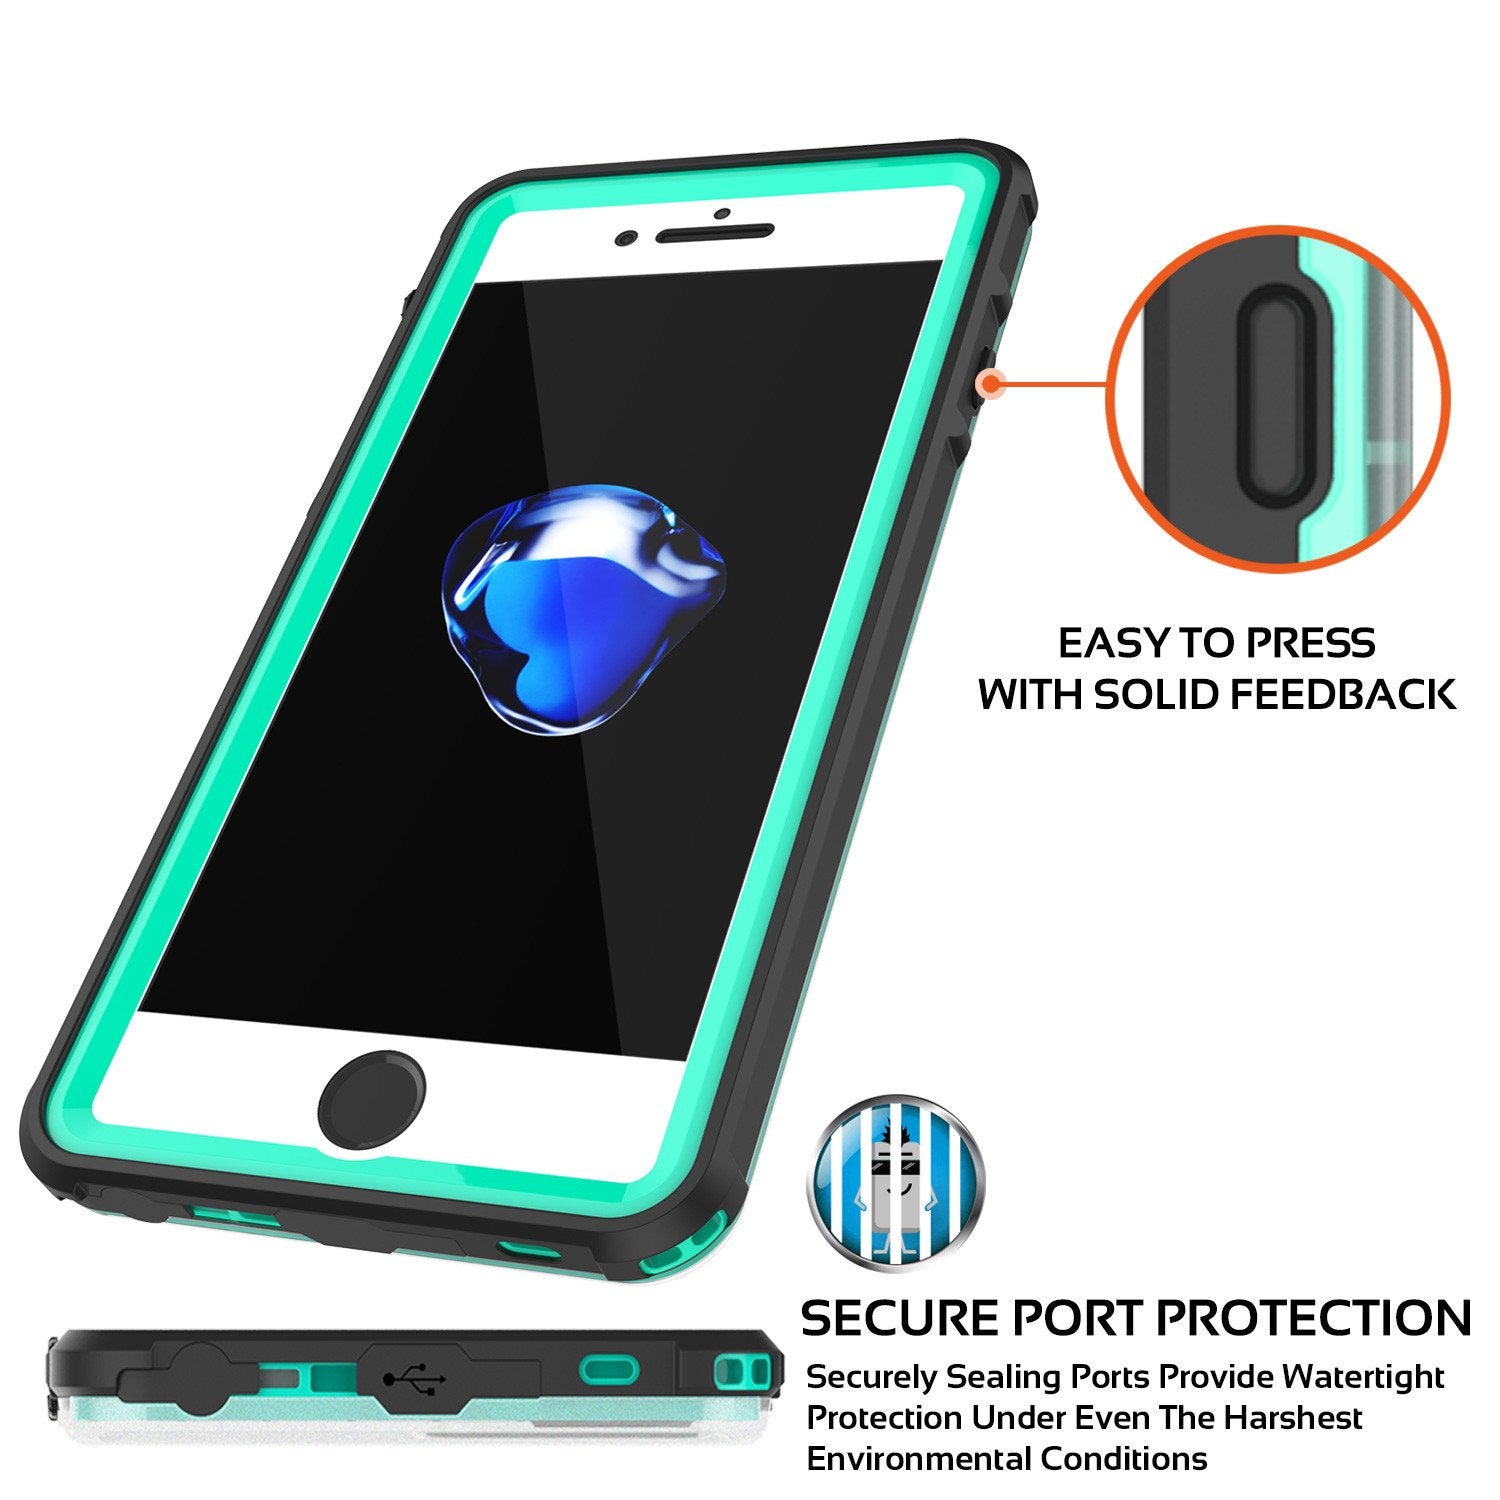 iPhone 7+ Plus Waterproof Case, PUNKcase CRYSTAL Teal W/ Attached Screen Protector  | Warranty - PunkCase NZ